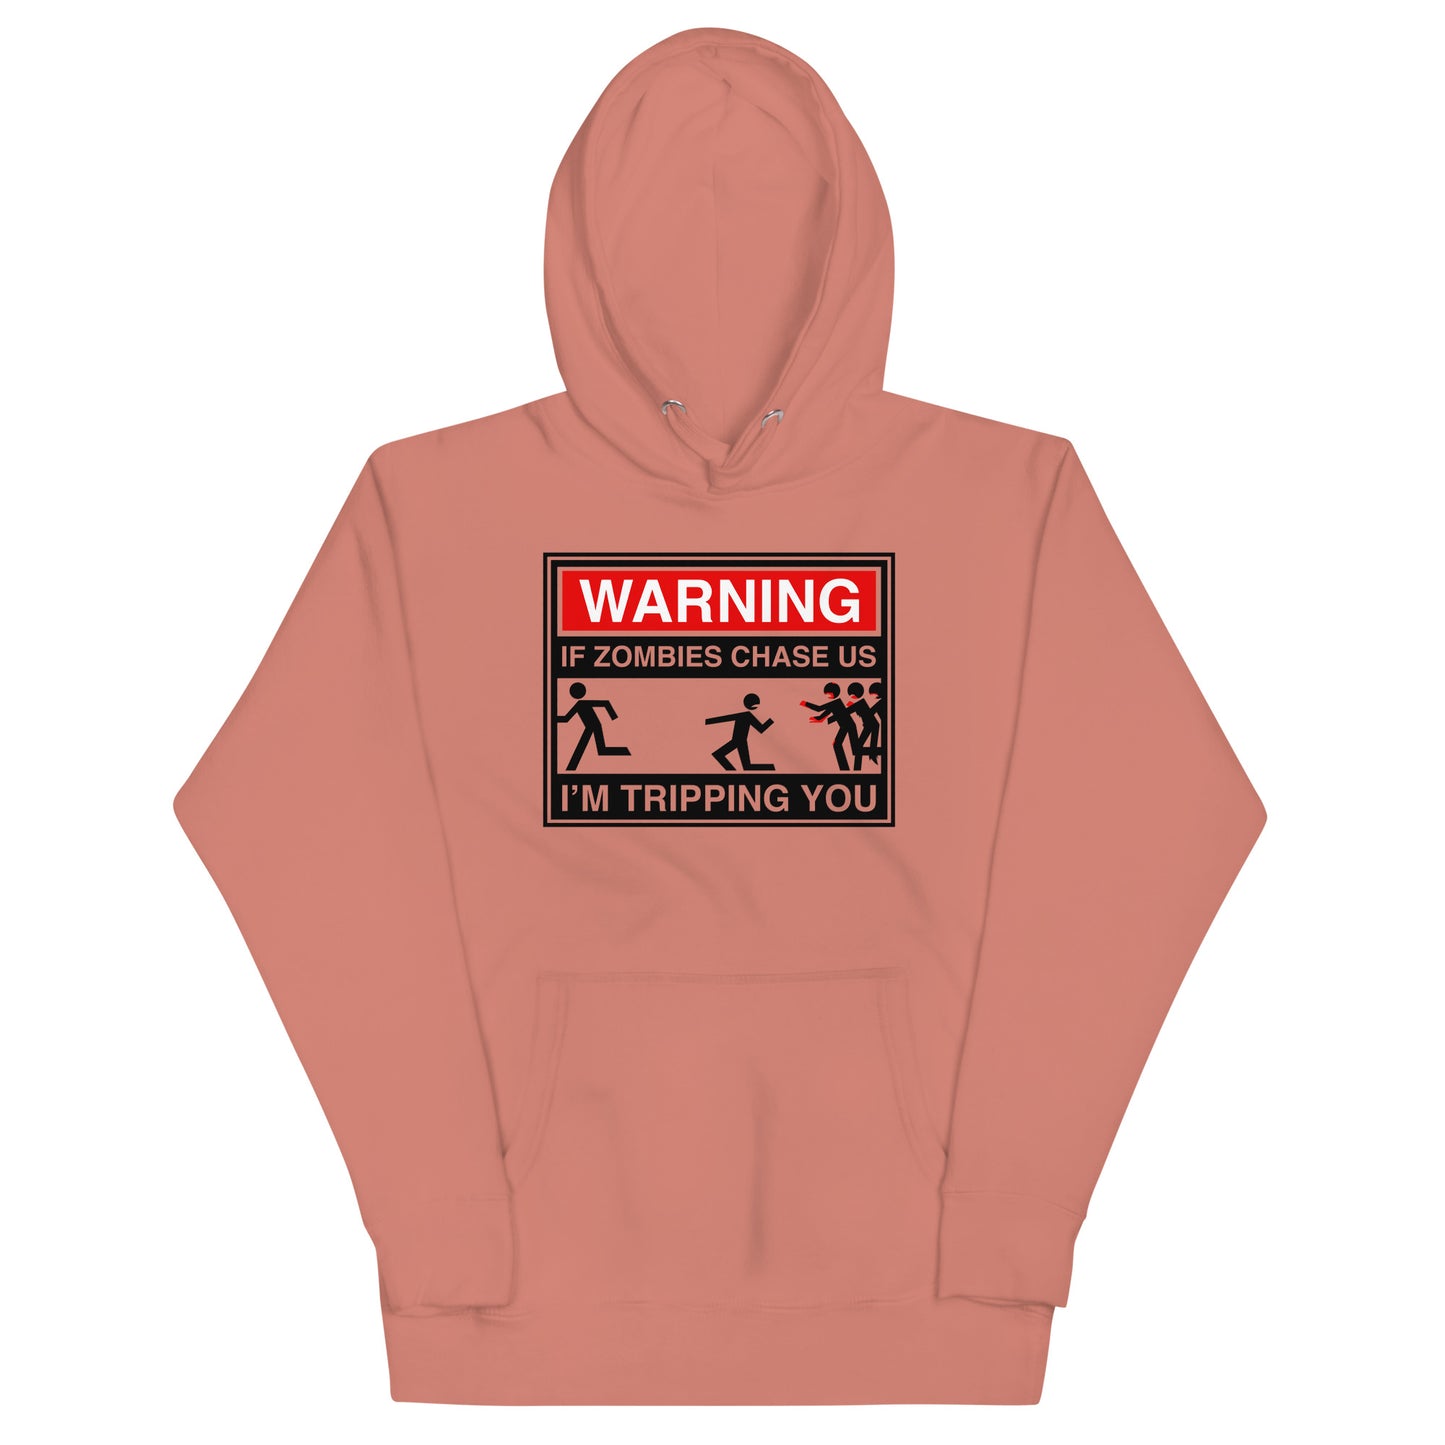 If Zombies Chase Us Unisex Hoodie